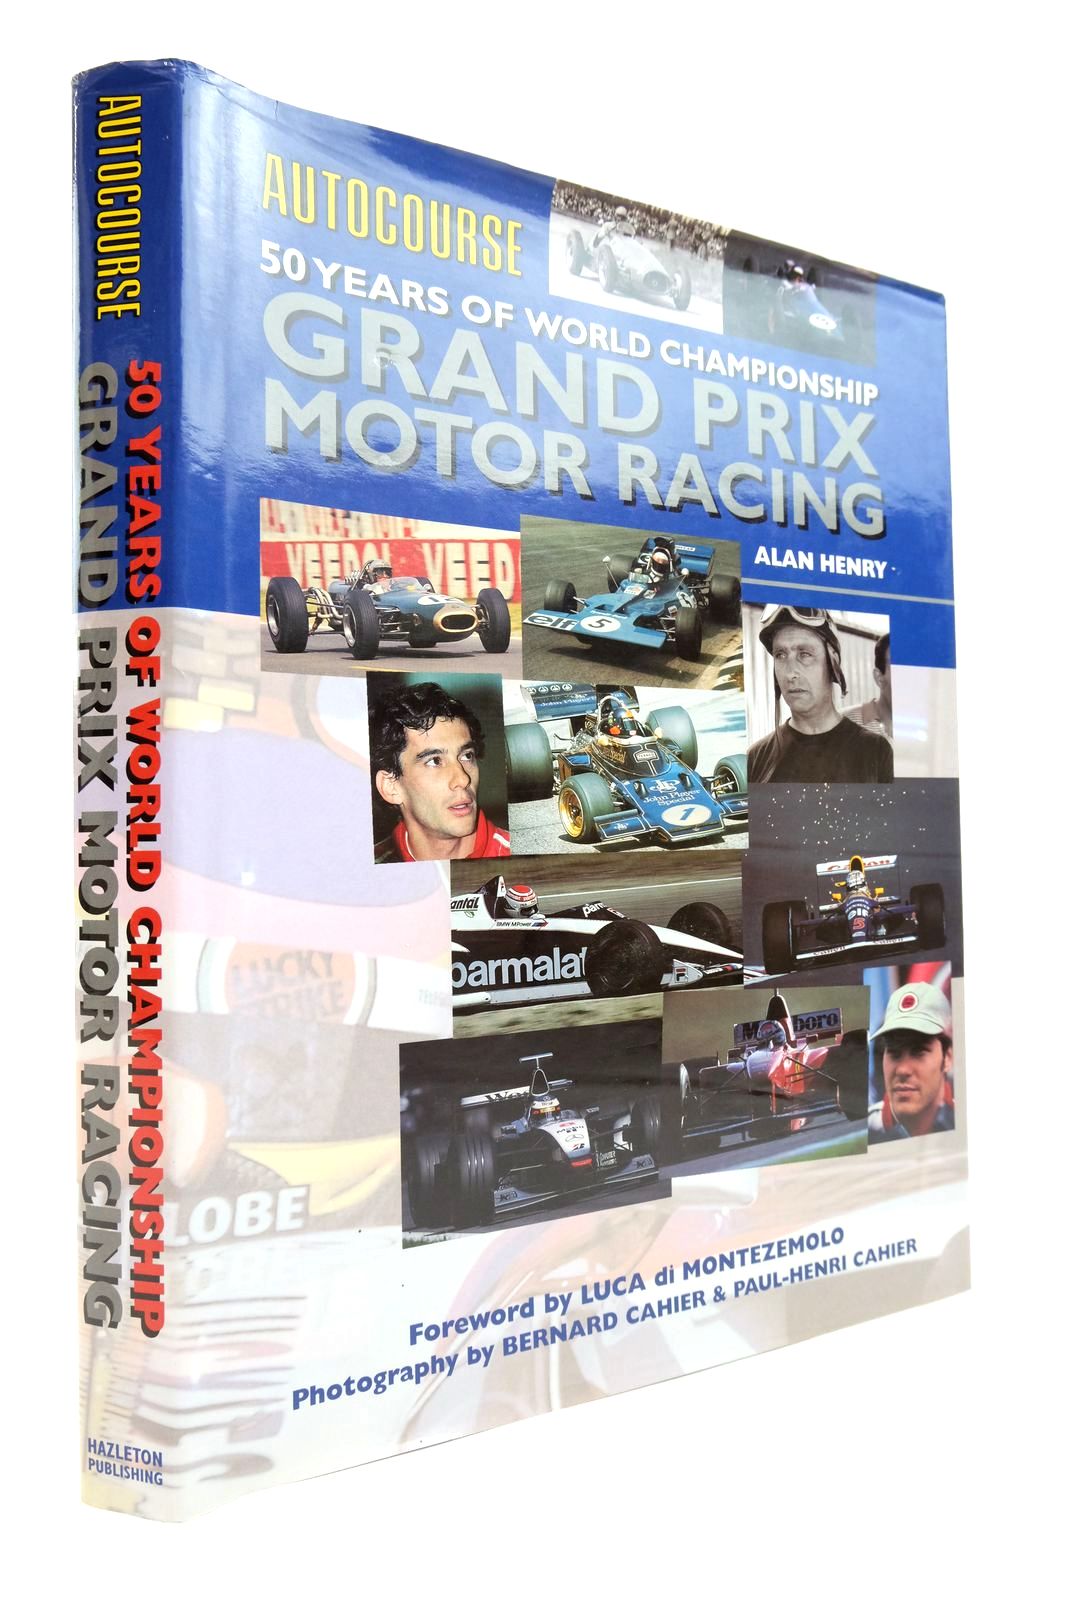 Photo of AUTOCOURSE 50 YEARS OF WORLD CHAMPIONSHIP GRAND PRIX MOTOR RACING written by Henry, Alan published by Hazleton Publishing (STOCK CODE: 2140147)  for sale by Stella & Rose's Books